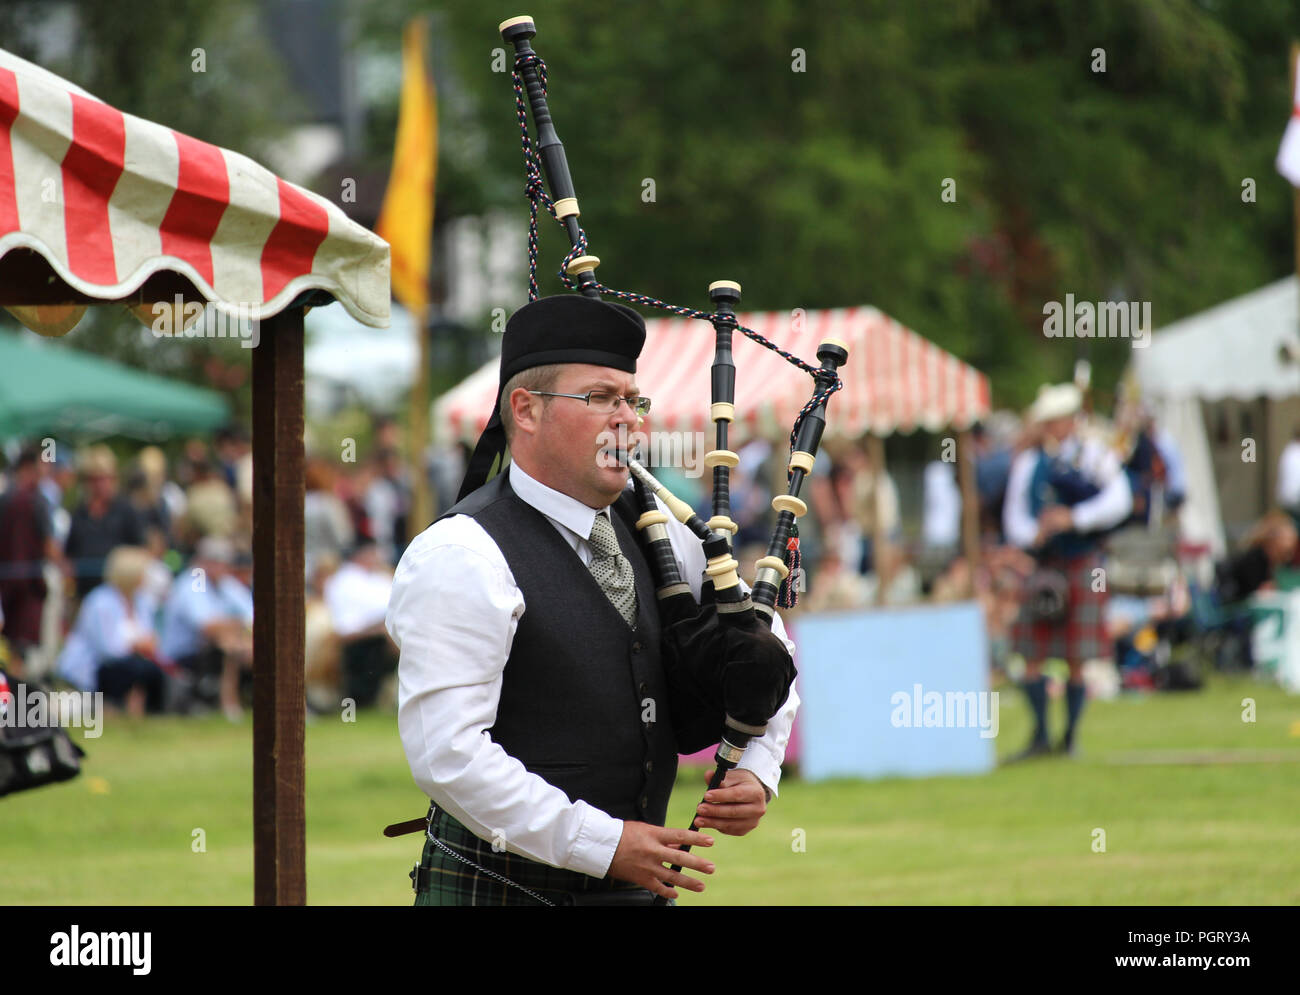 CRIEFF, SCOTLAND, 21 JULY 2018: Unknown competitors during the piping competition at the Lochearnhead highland Games near Crieff in Scotland. Stock Photo